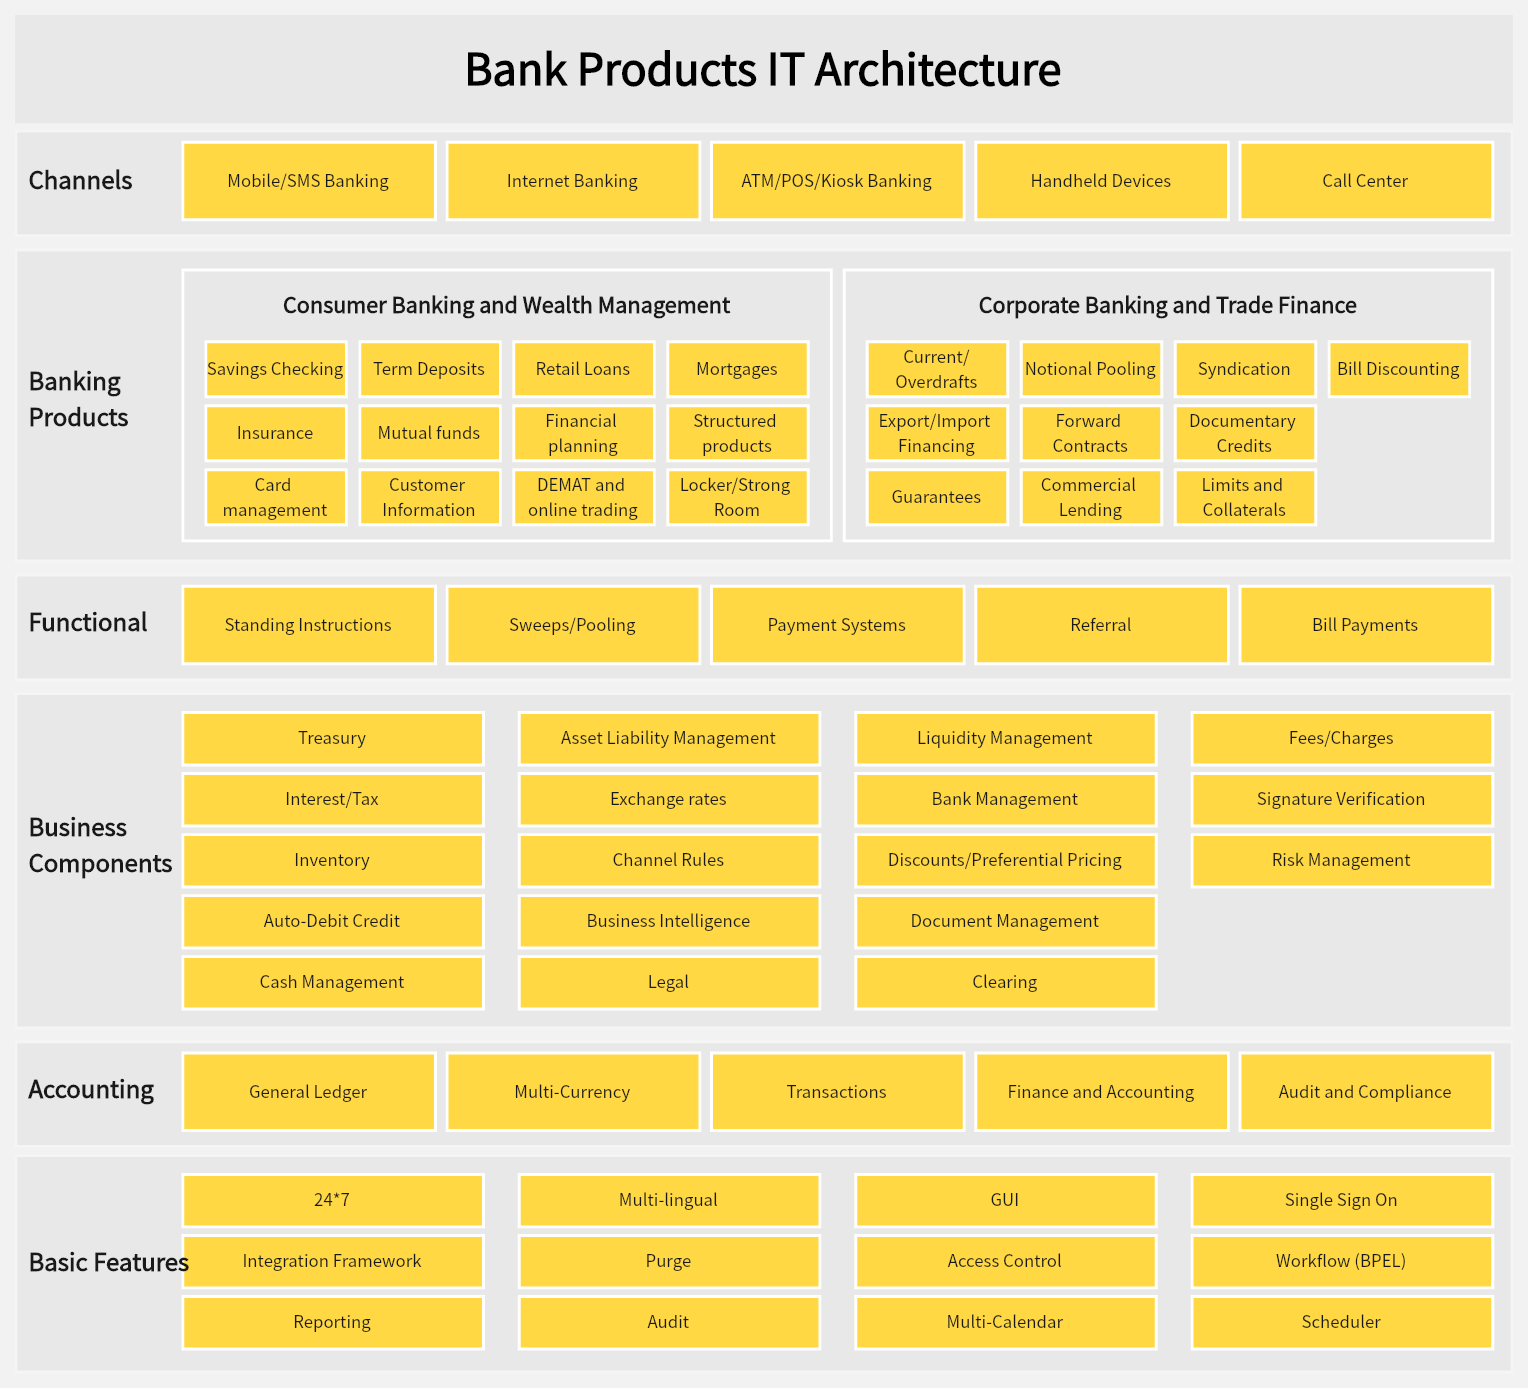 architecture-diagram-bank-products-it-architecture